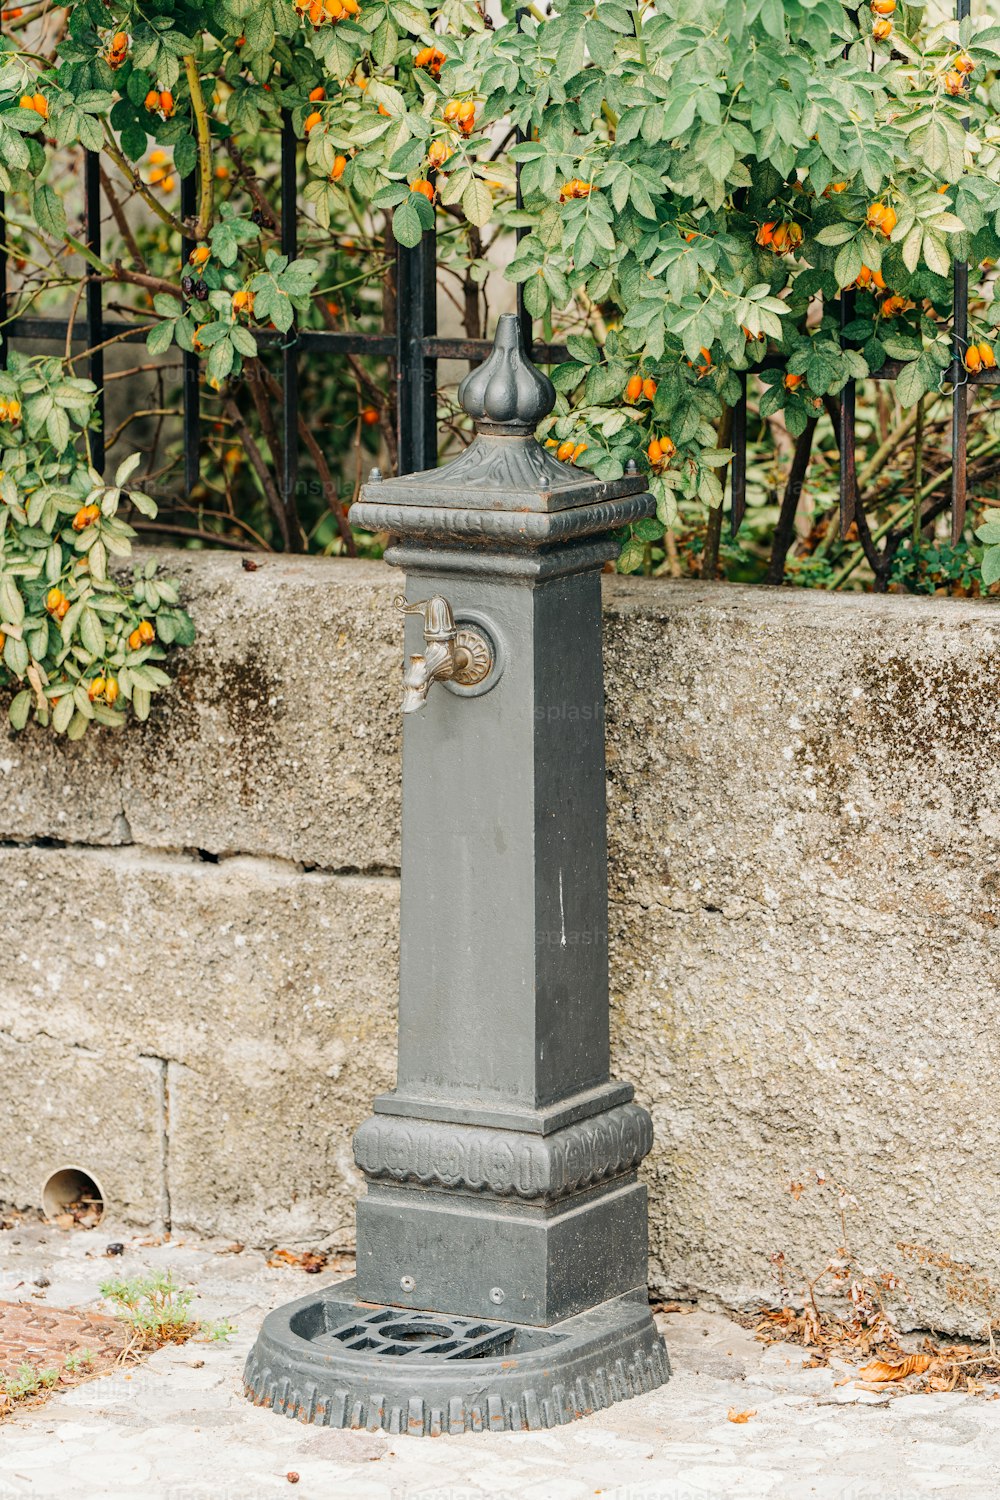 a gray fire hydrant sitting on the side of a road